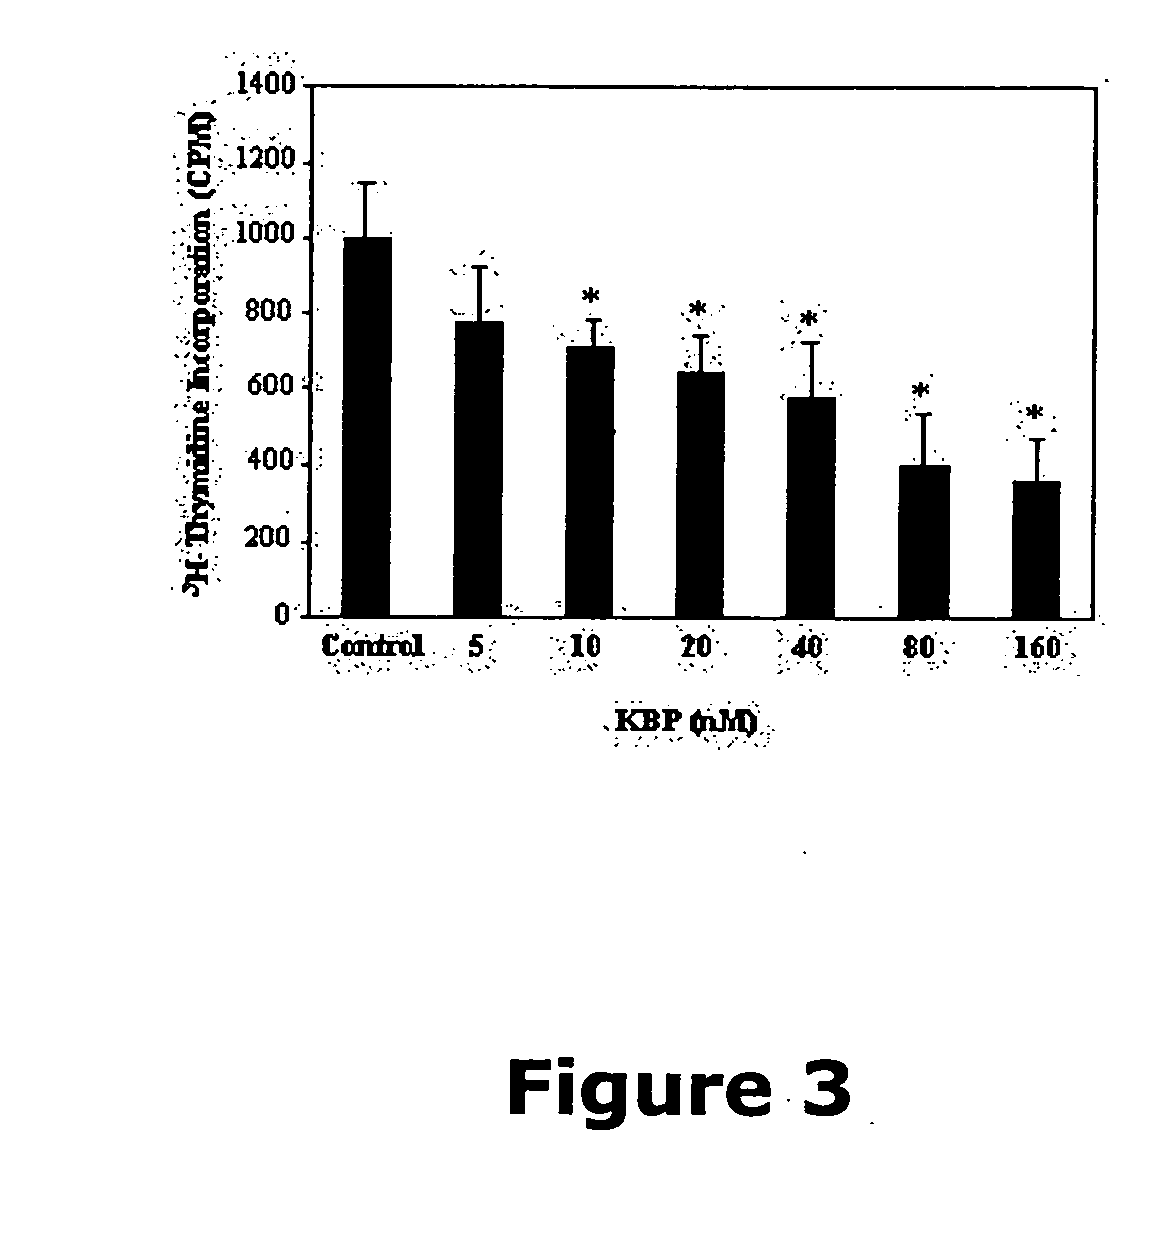 Compounds useful in inhibiting vascular leakage, inflammation and fibrosis and methods of making and using same